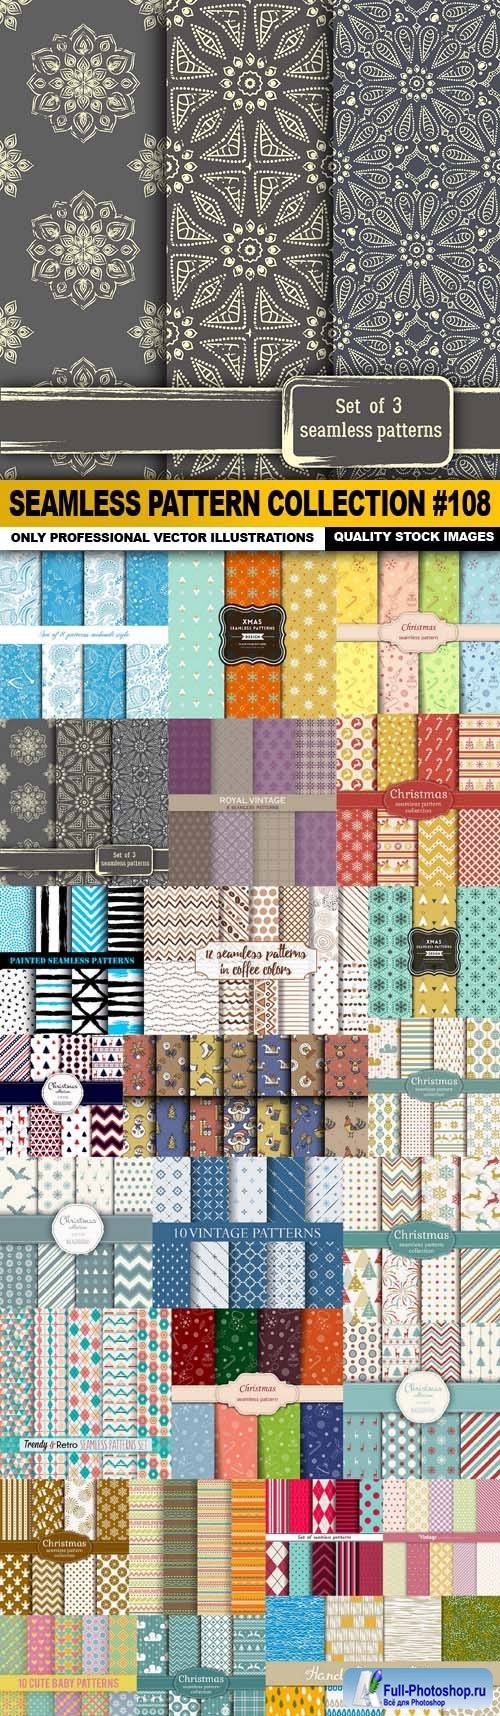 Seamless Pattern Collection #108 - 25 Vector